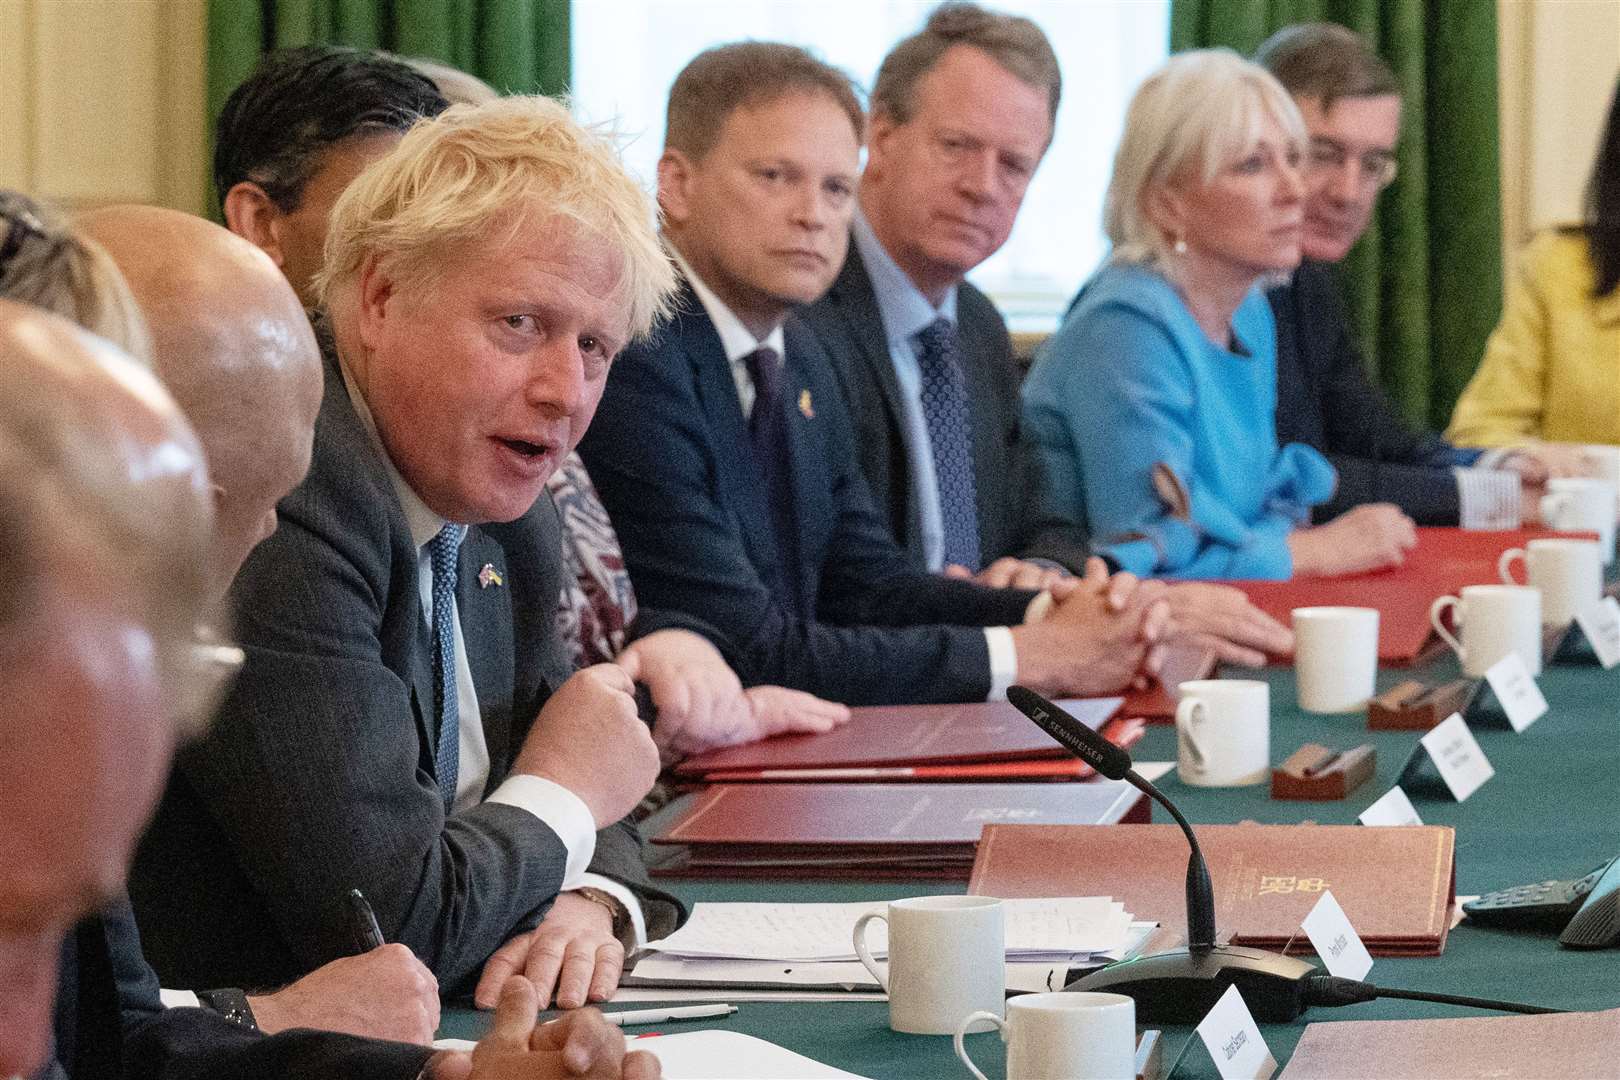 Prime Minister Boris Johnson speaks at the start of a Cabinet meeting at 10 Downing Street, London (Carl Court/PA)